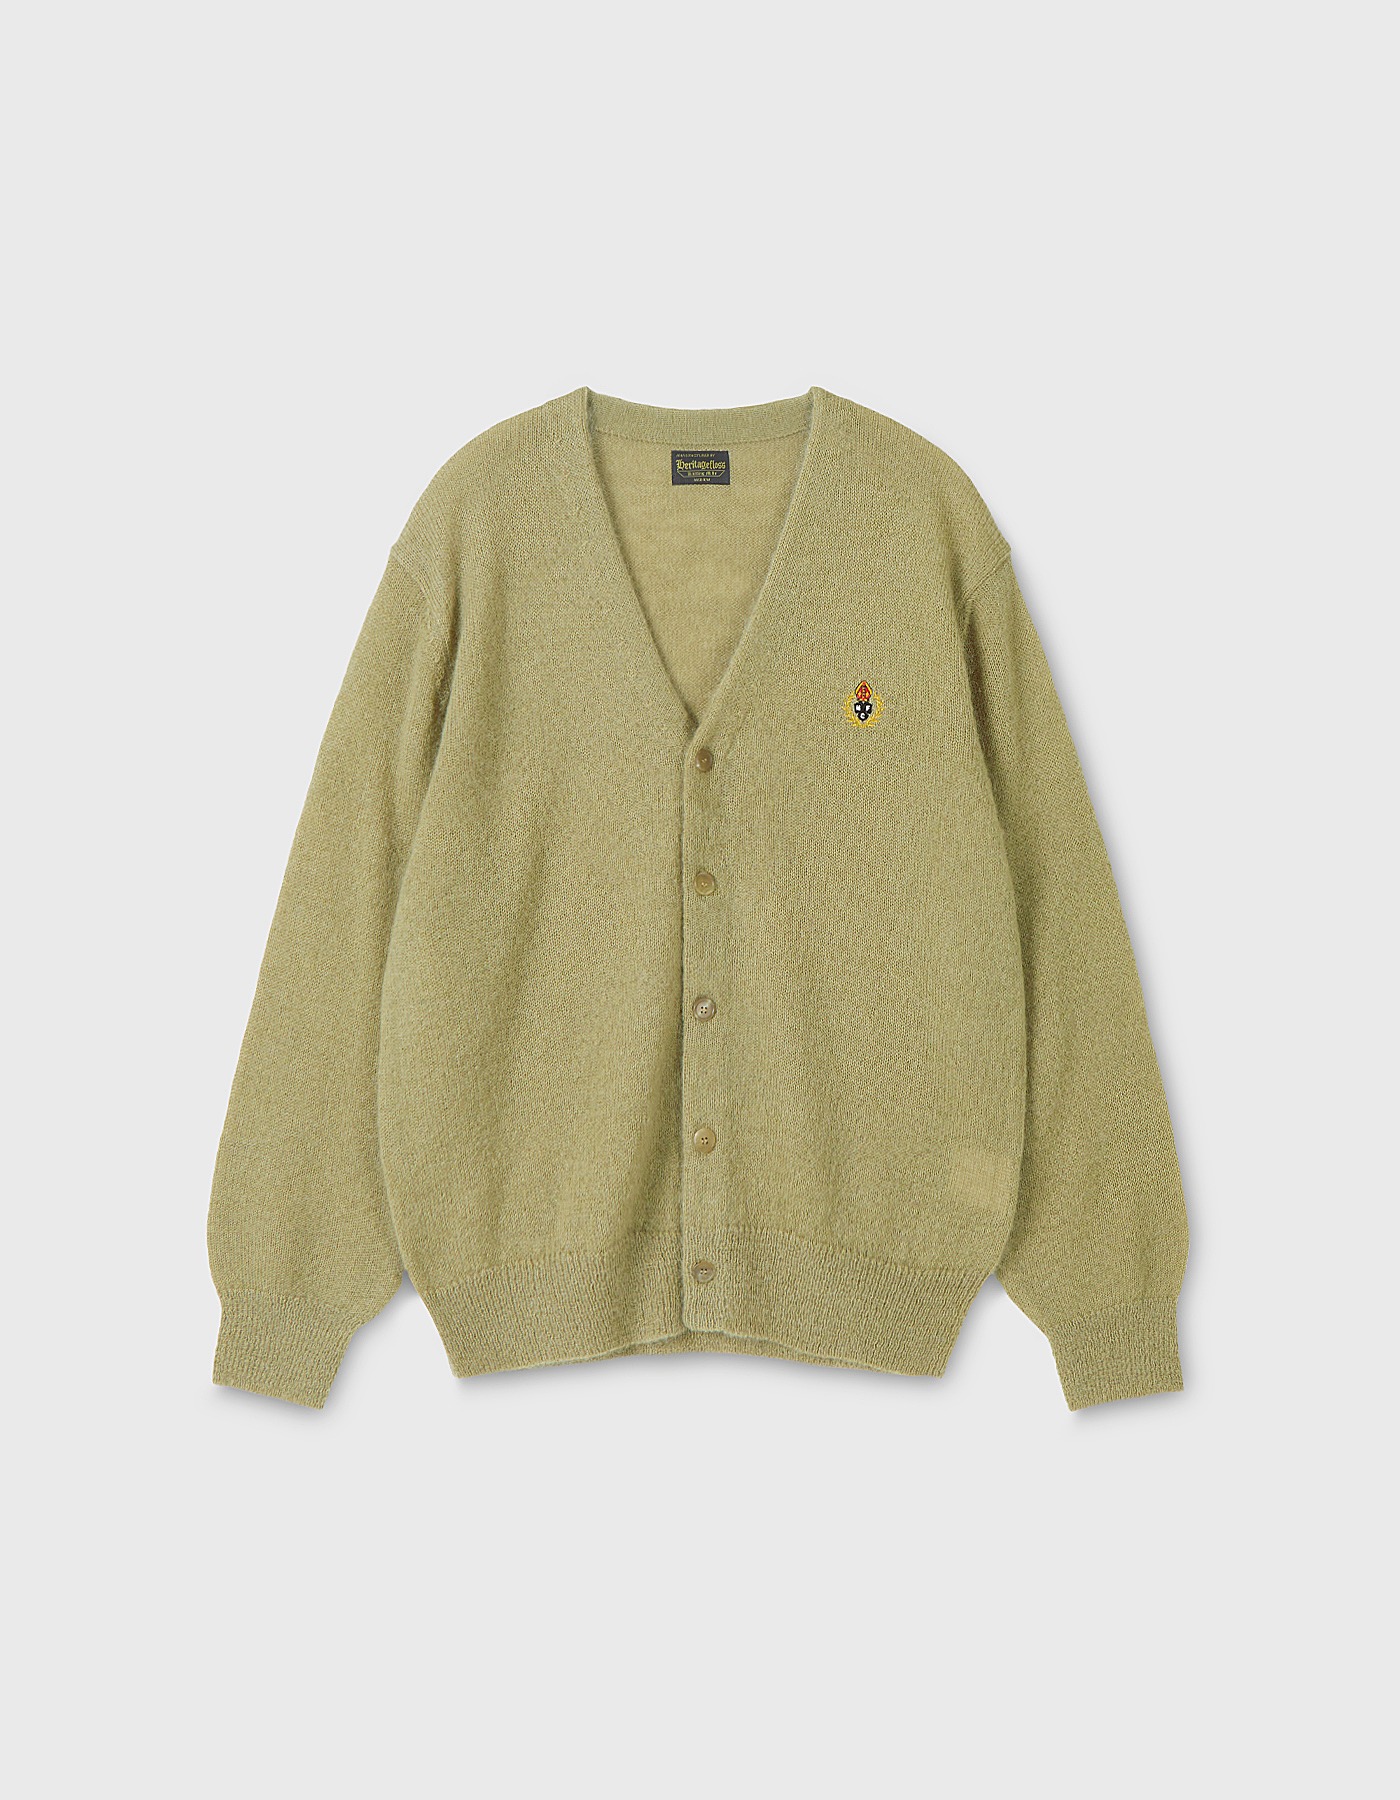 CREST MOHAIR CARDIGAN / Olive Green